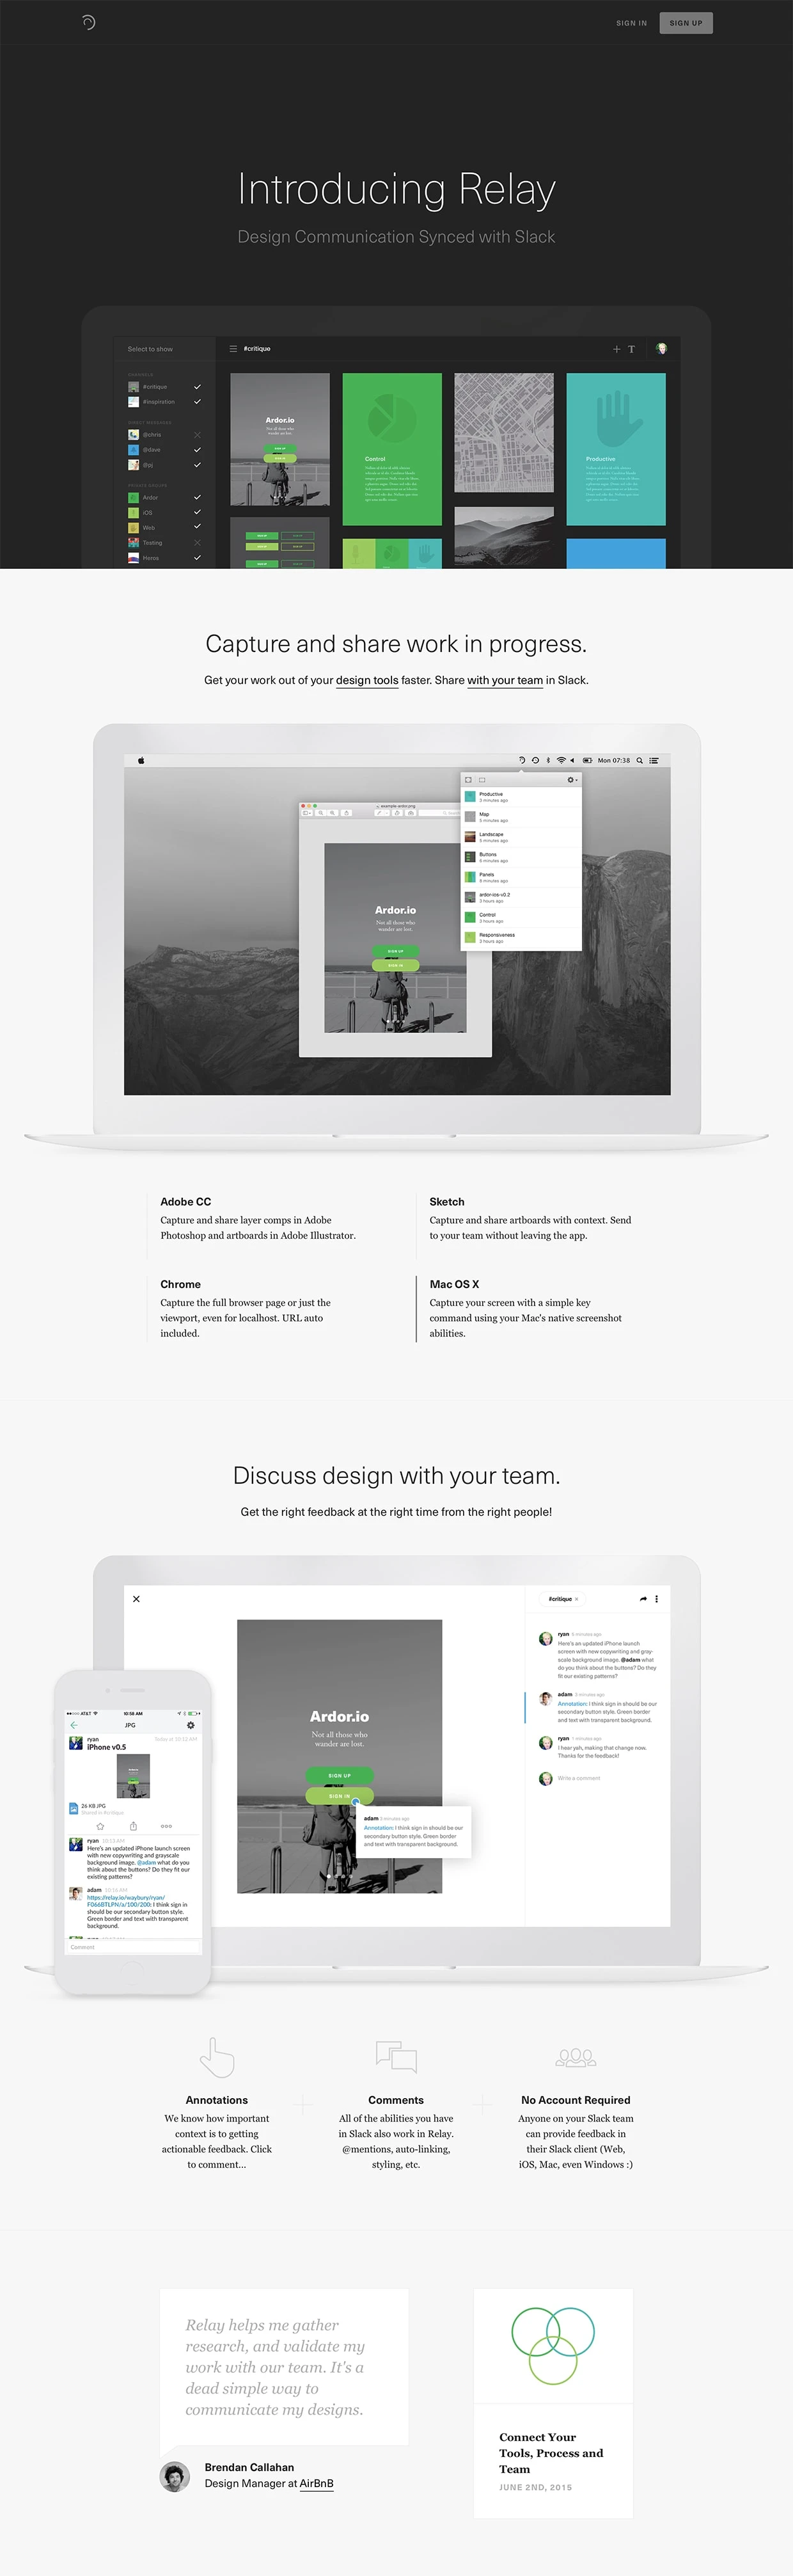 Relay Landing Page Example: Design communication synced with Slack. Capture and share work in progress. Discuss design with your team.